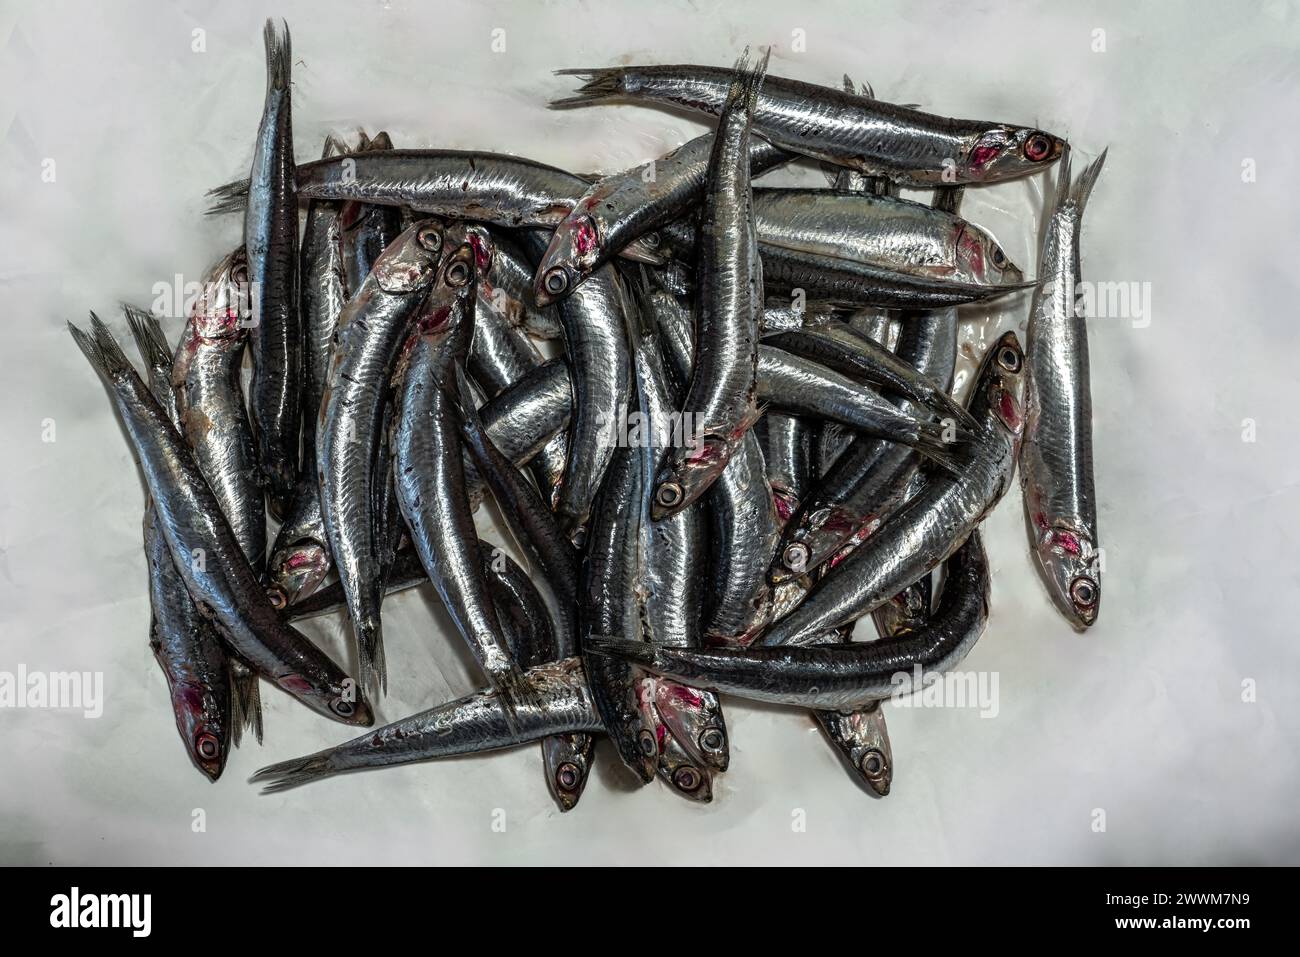 Mediterranean anchovies on a sheet of white paper purchased at the market. Pratola Peligna, province of L'Aquila, Abruzzo, Italy, Europe Stock Photo